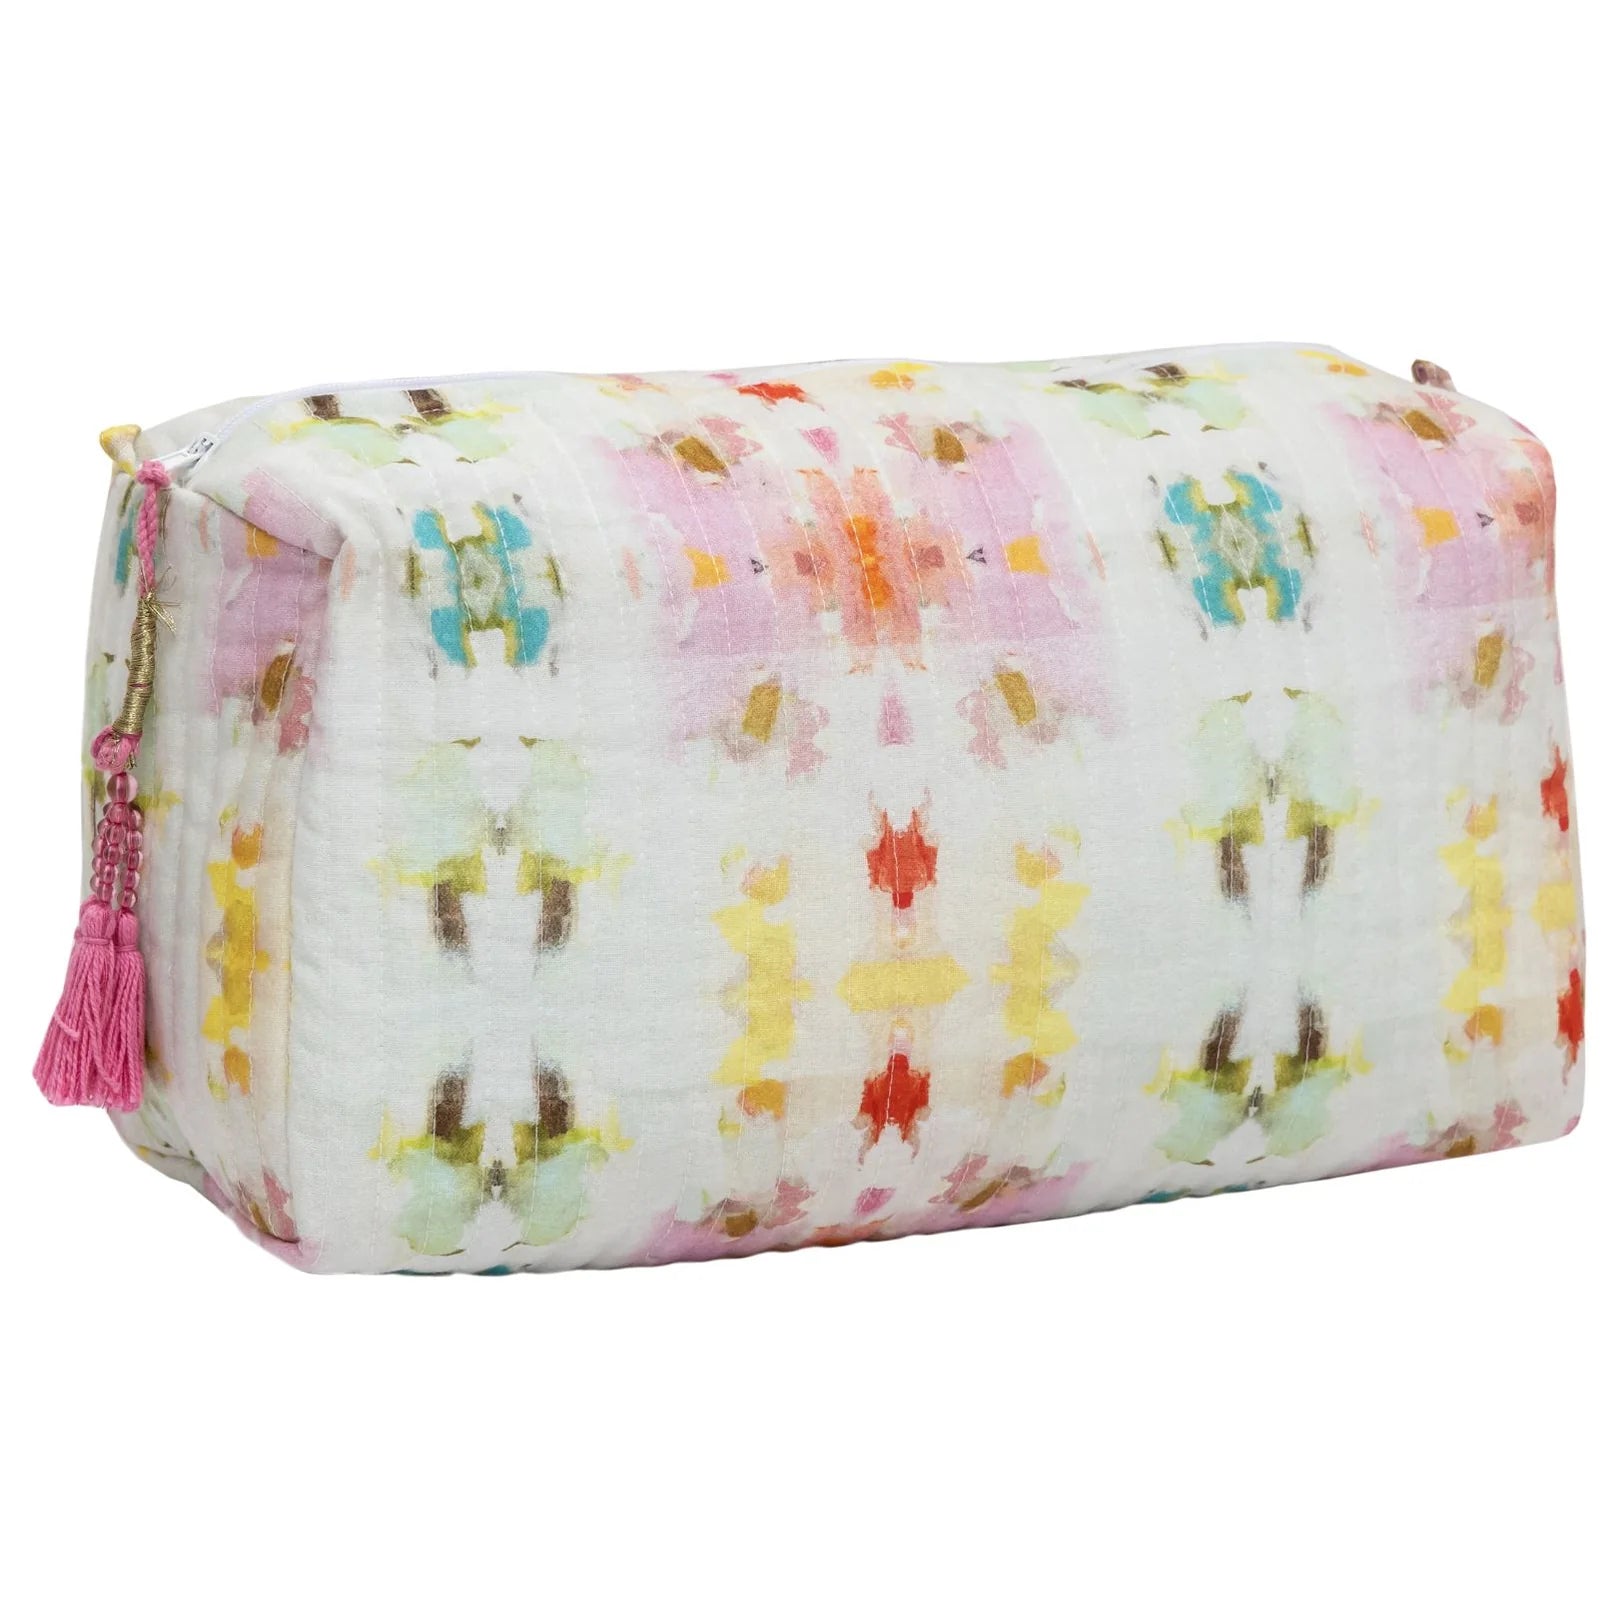 Laura Park Quilted Cosmetic Bag - Large, Assorted Patterns